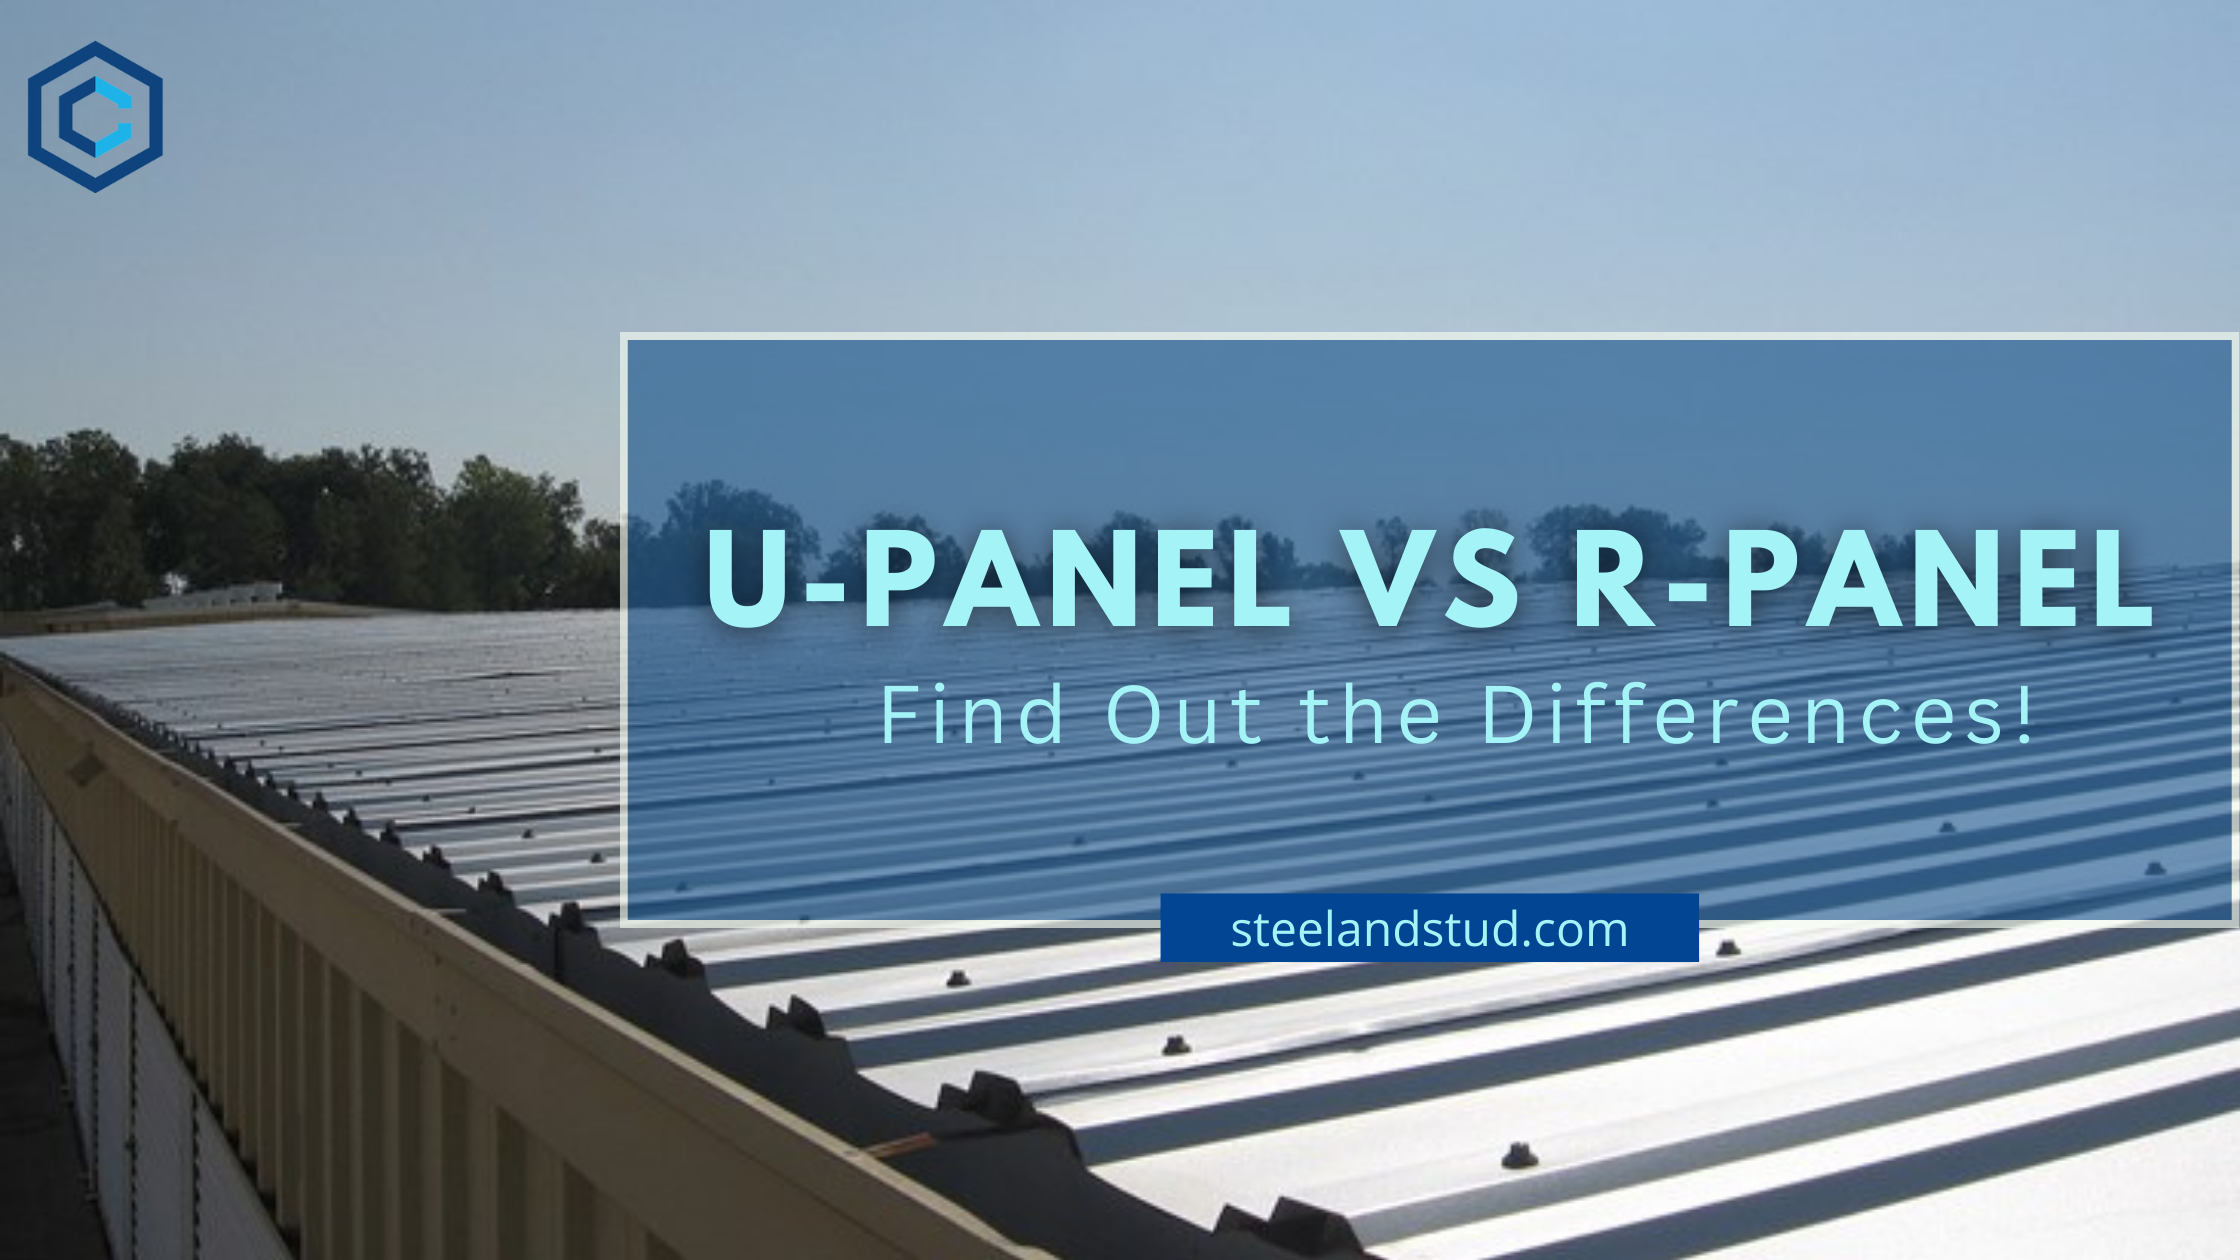 U-Panel vs R-Panel: Find Out the Differences!